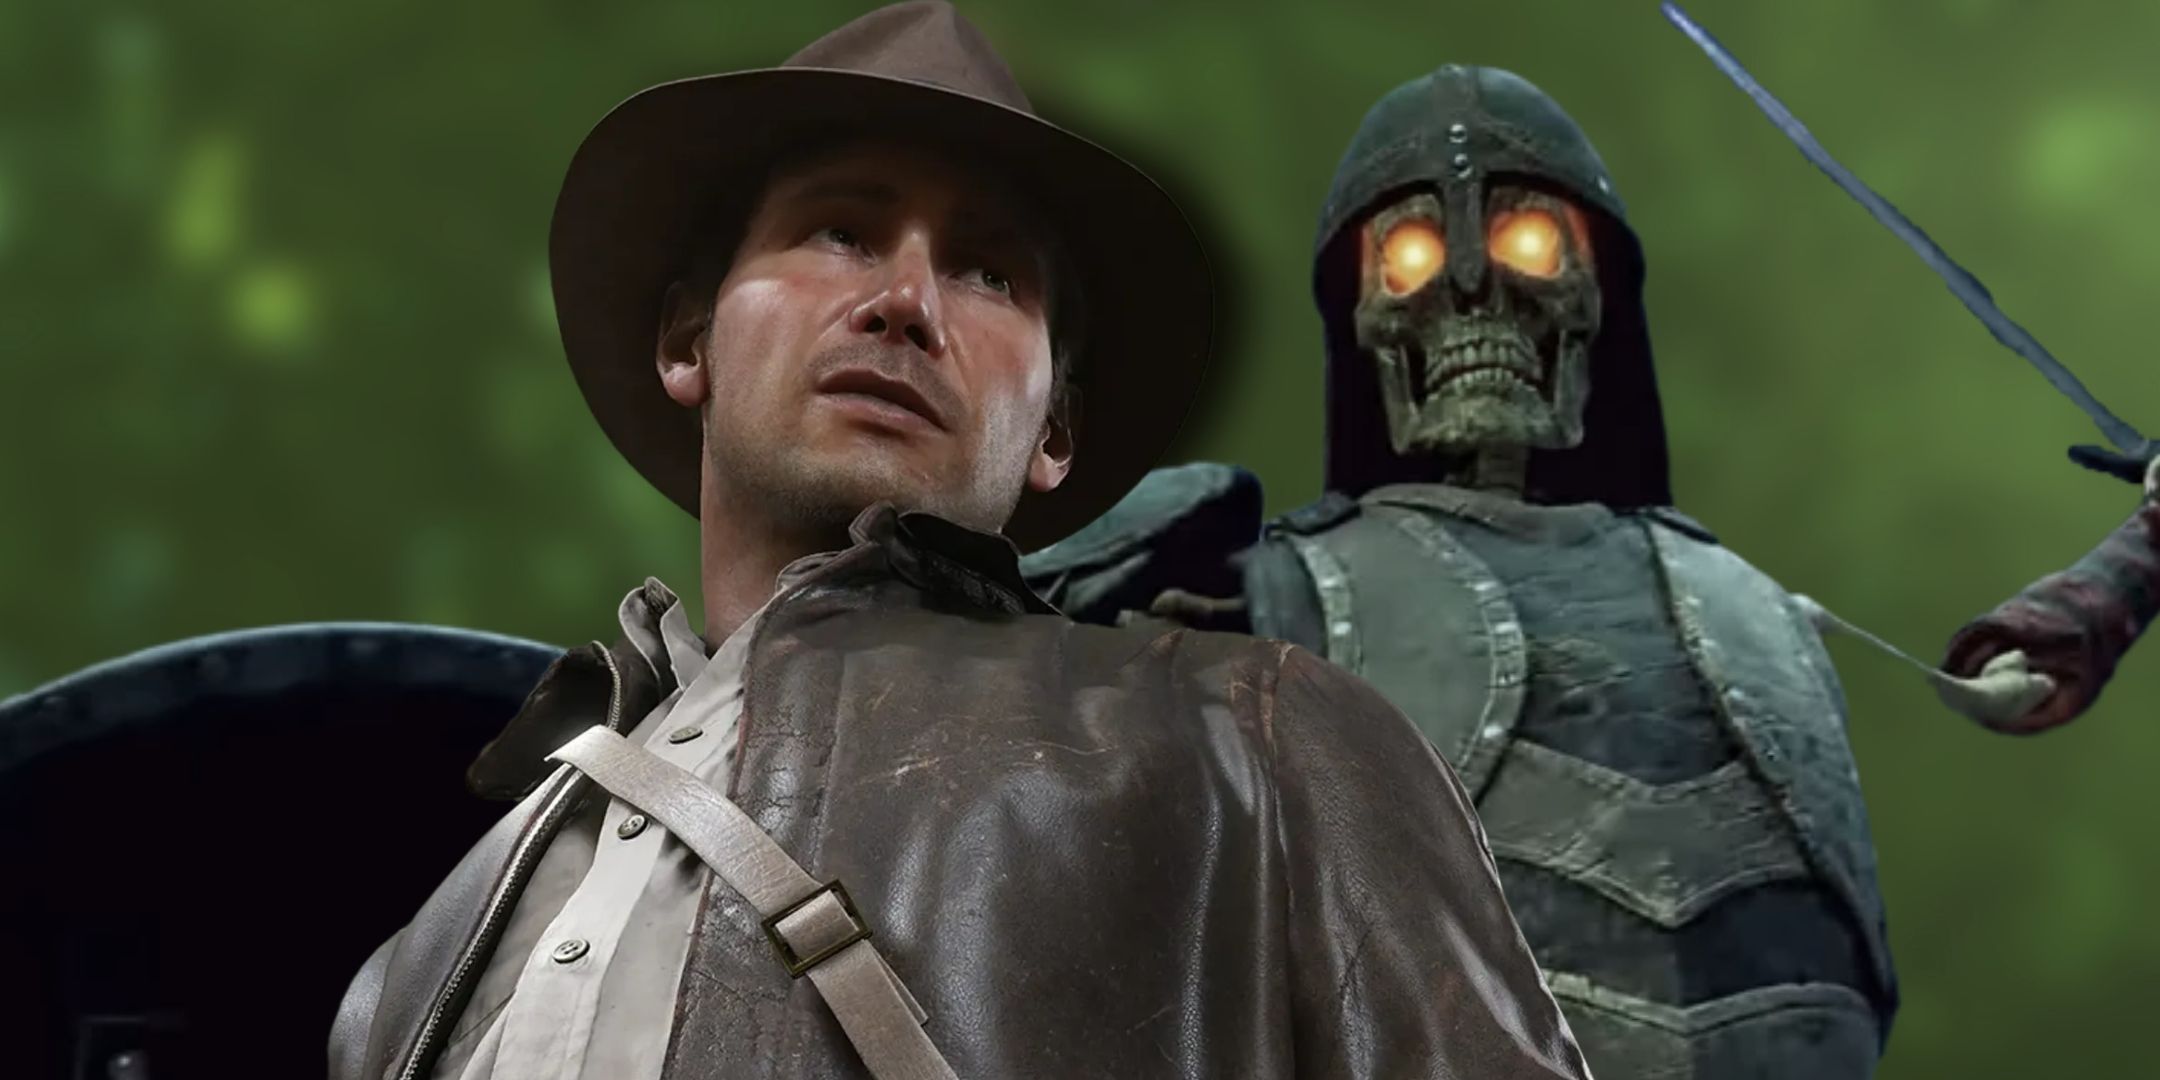 Indiana Jones and an enemy from Avowed stand next to eachother in front of a green background.